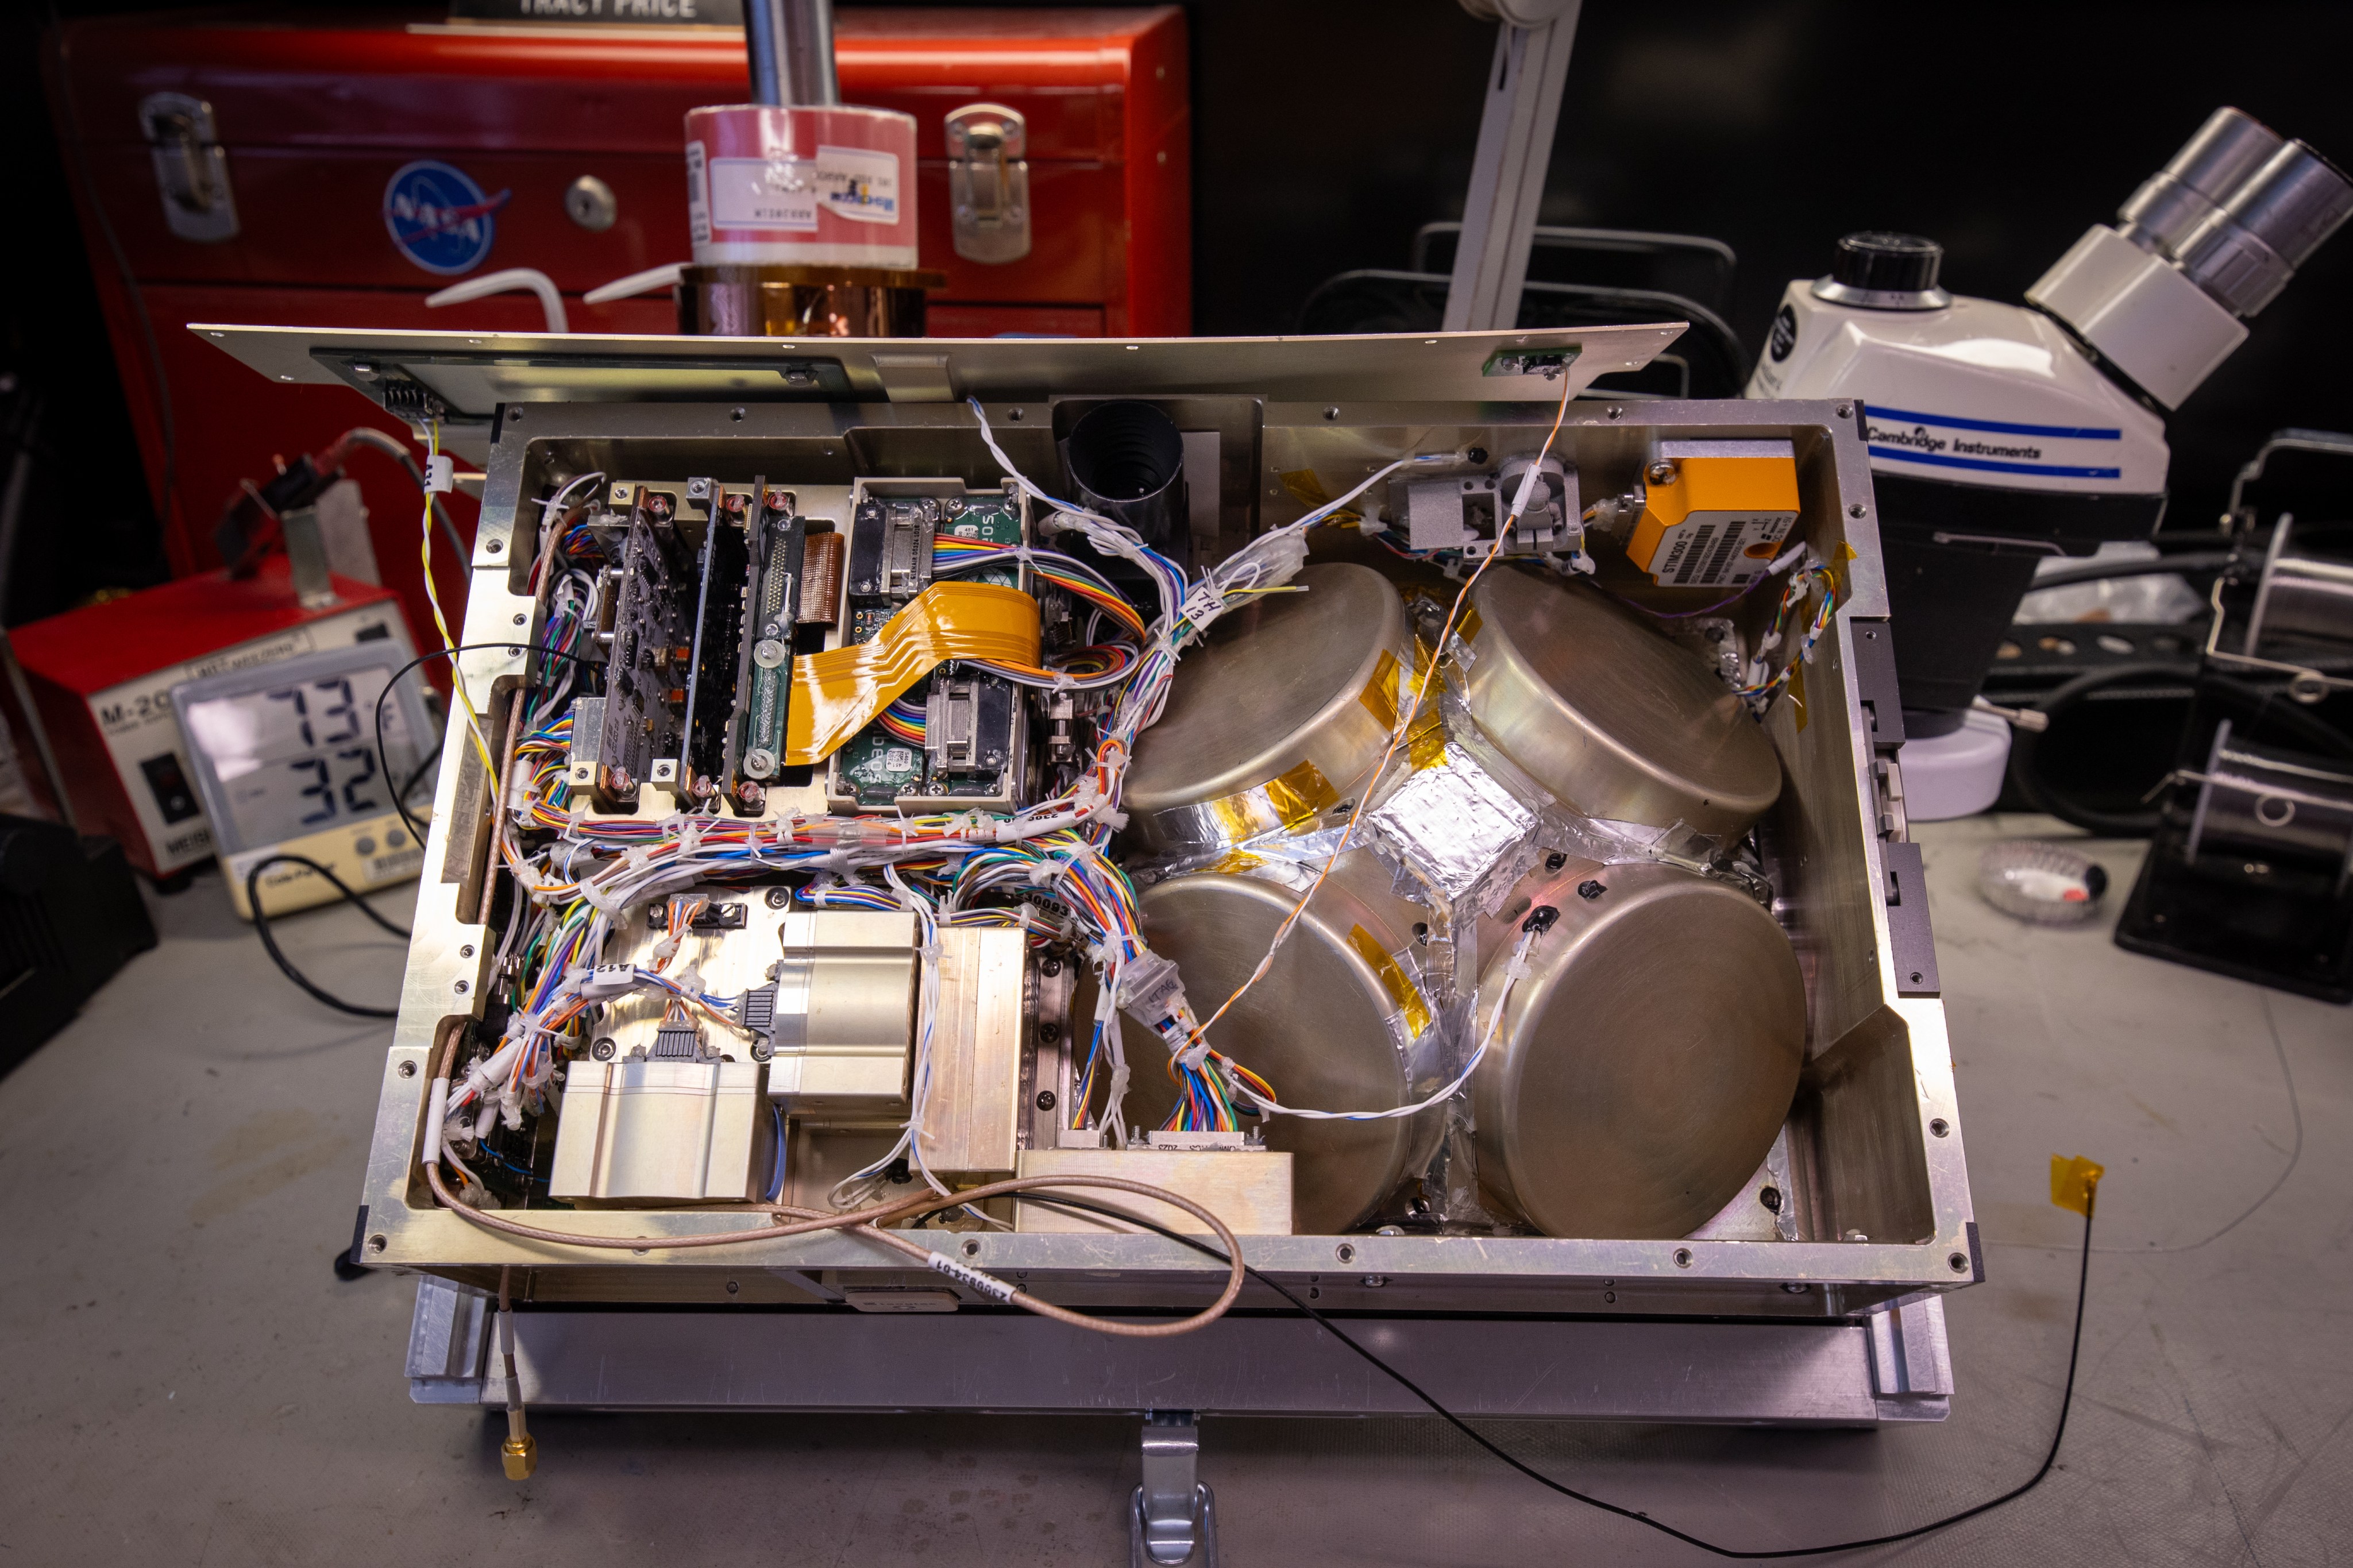 This photograph shows the inside of a small spacecraft.